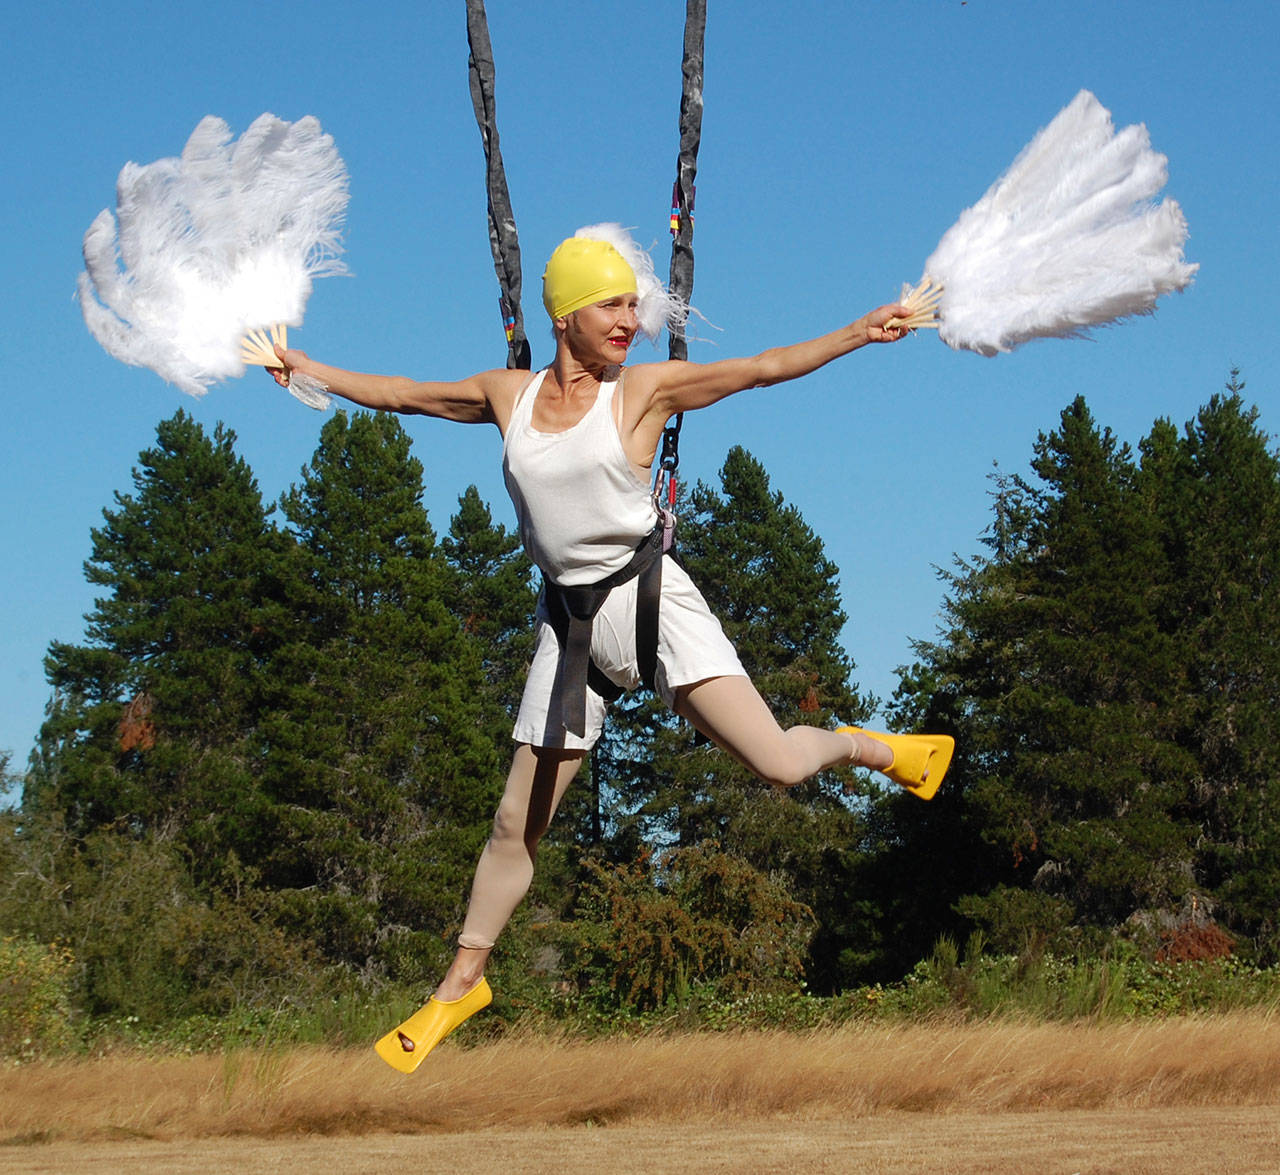 Janet McAlpin performed “Quack,” at Open Air Aerial Festival in 2019 (Michelle Bates Photo).